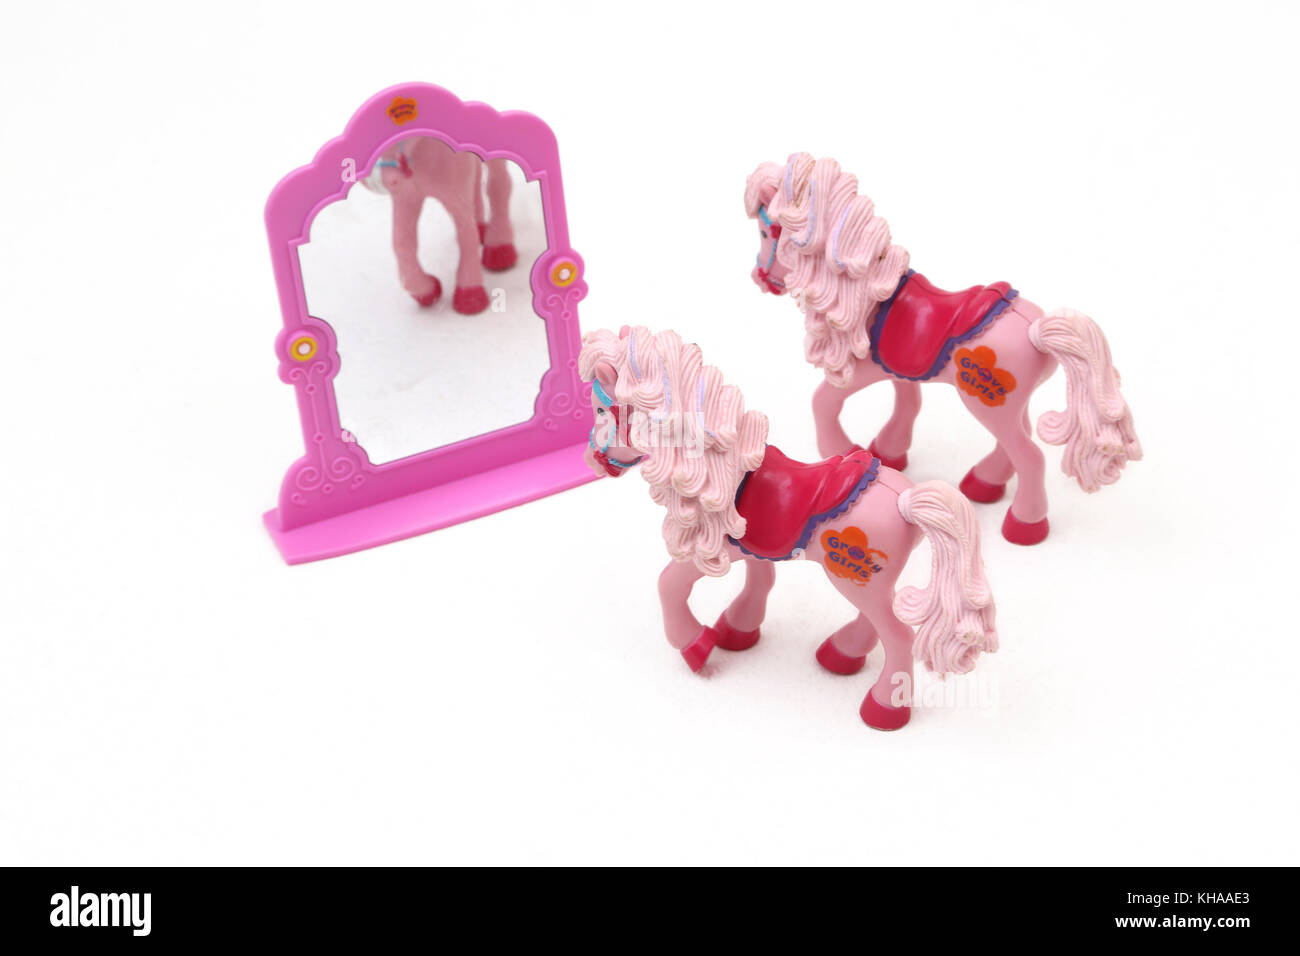 Toys Groovy Girls Horses And Mirror Stock Photo